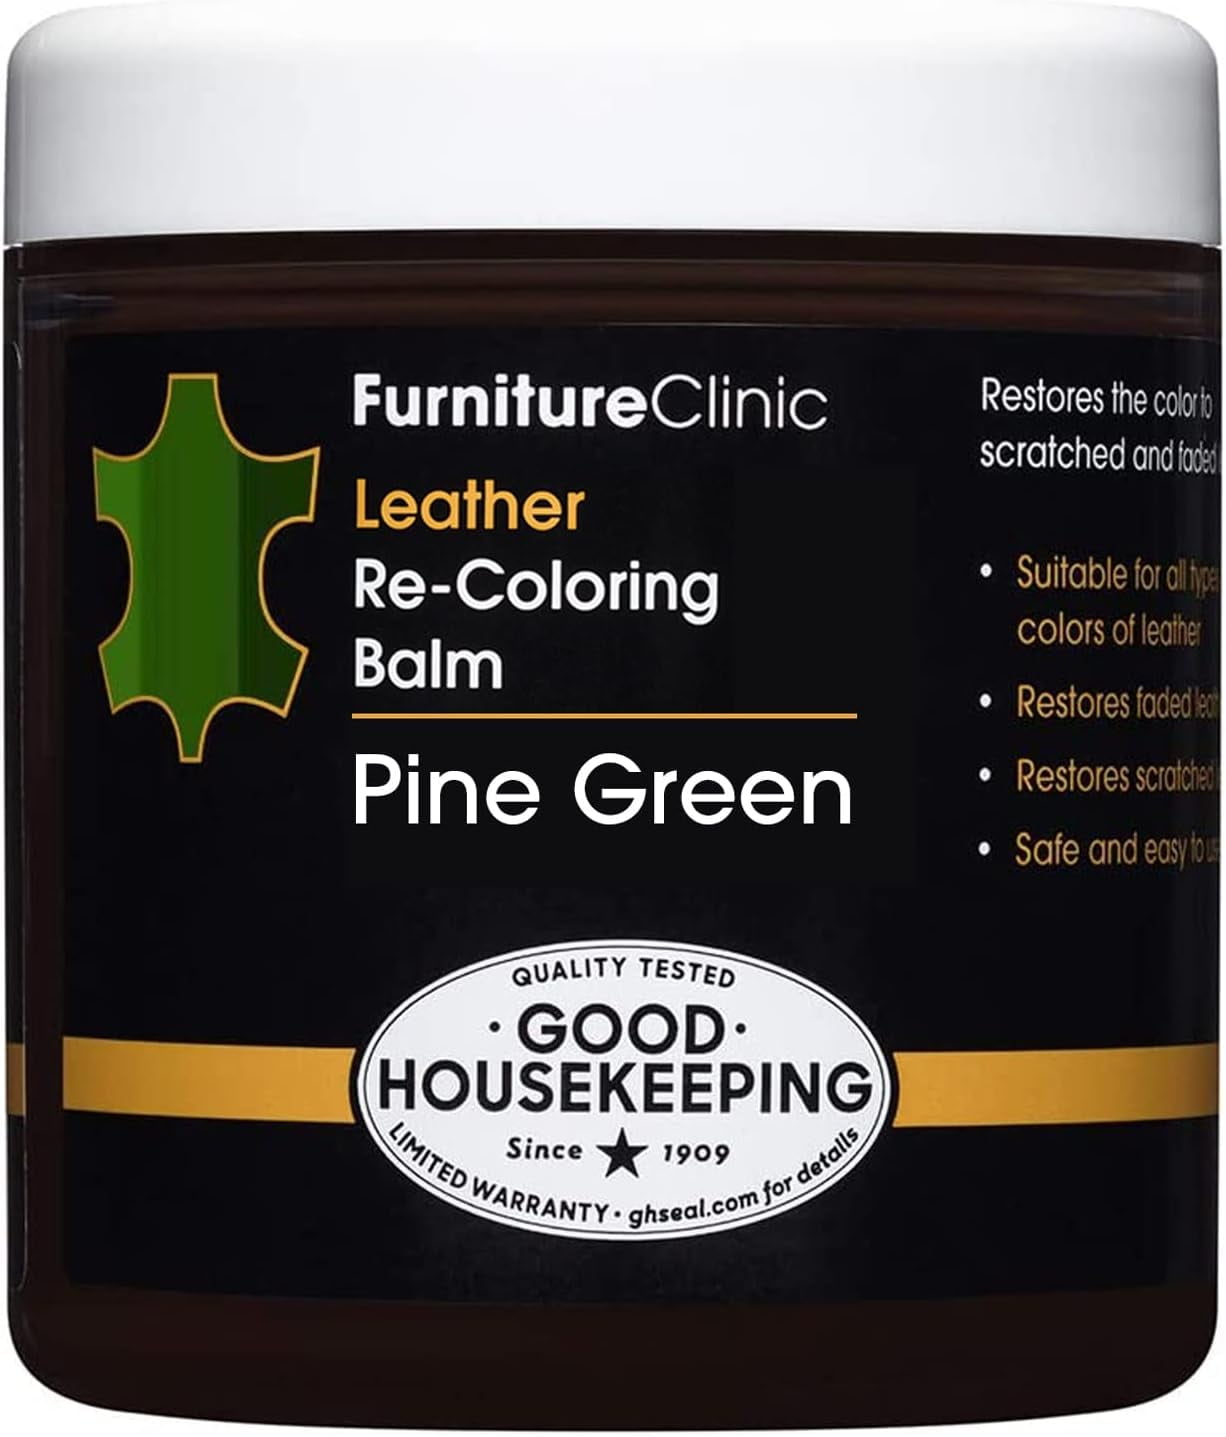  Furniture Clinic Leather Repair Paint & Dye, 2-in-1 Seal and  Color, Use on Faded, Worn, and Scratched Car Seats, Clothing